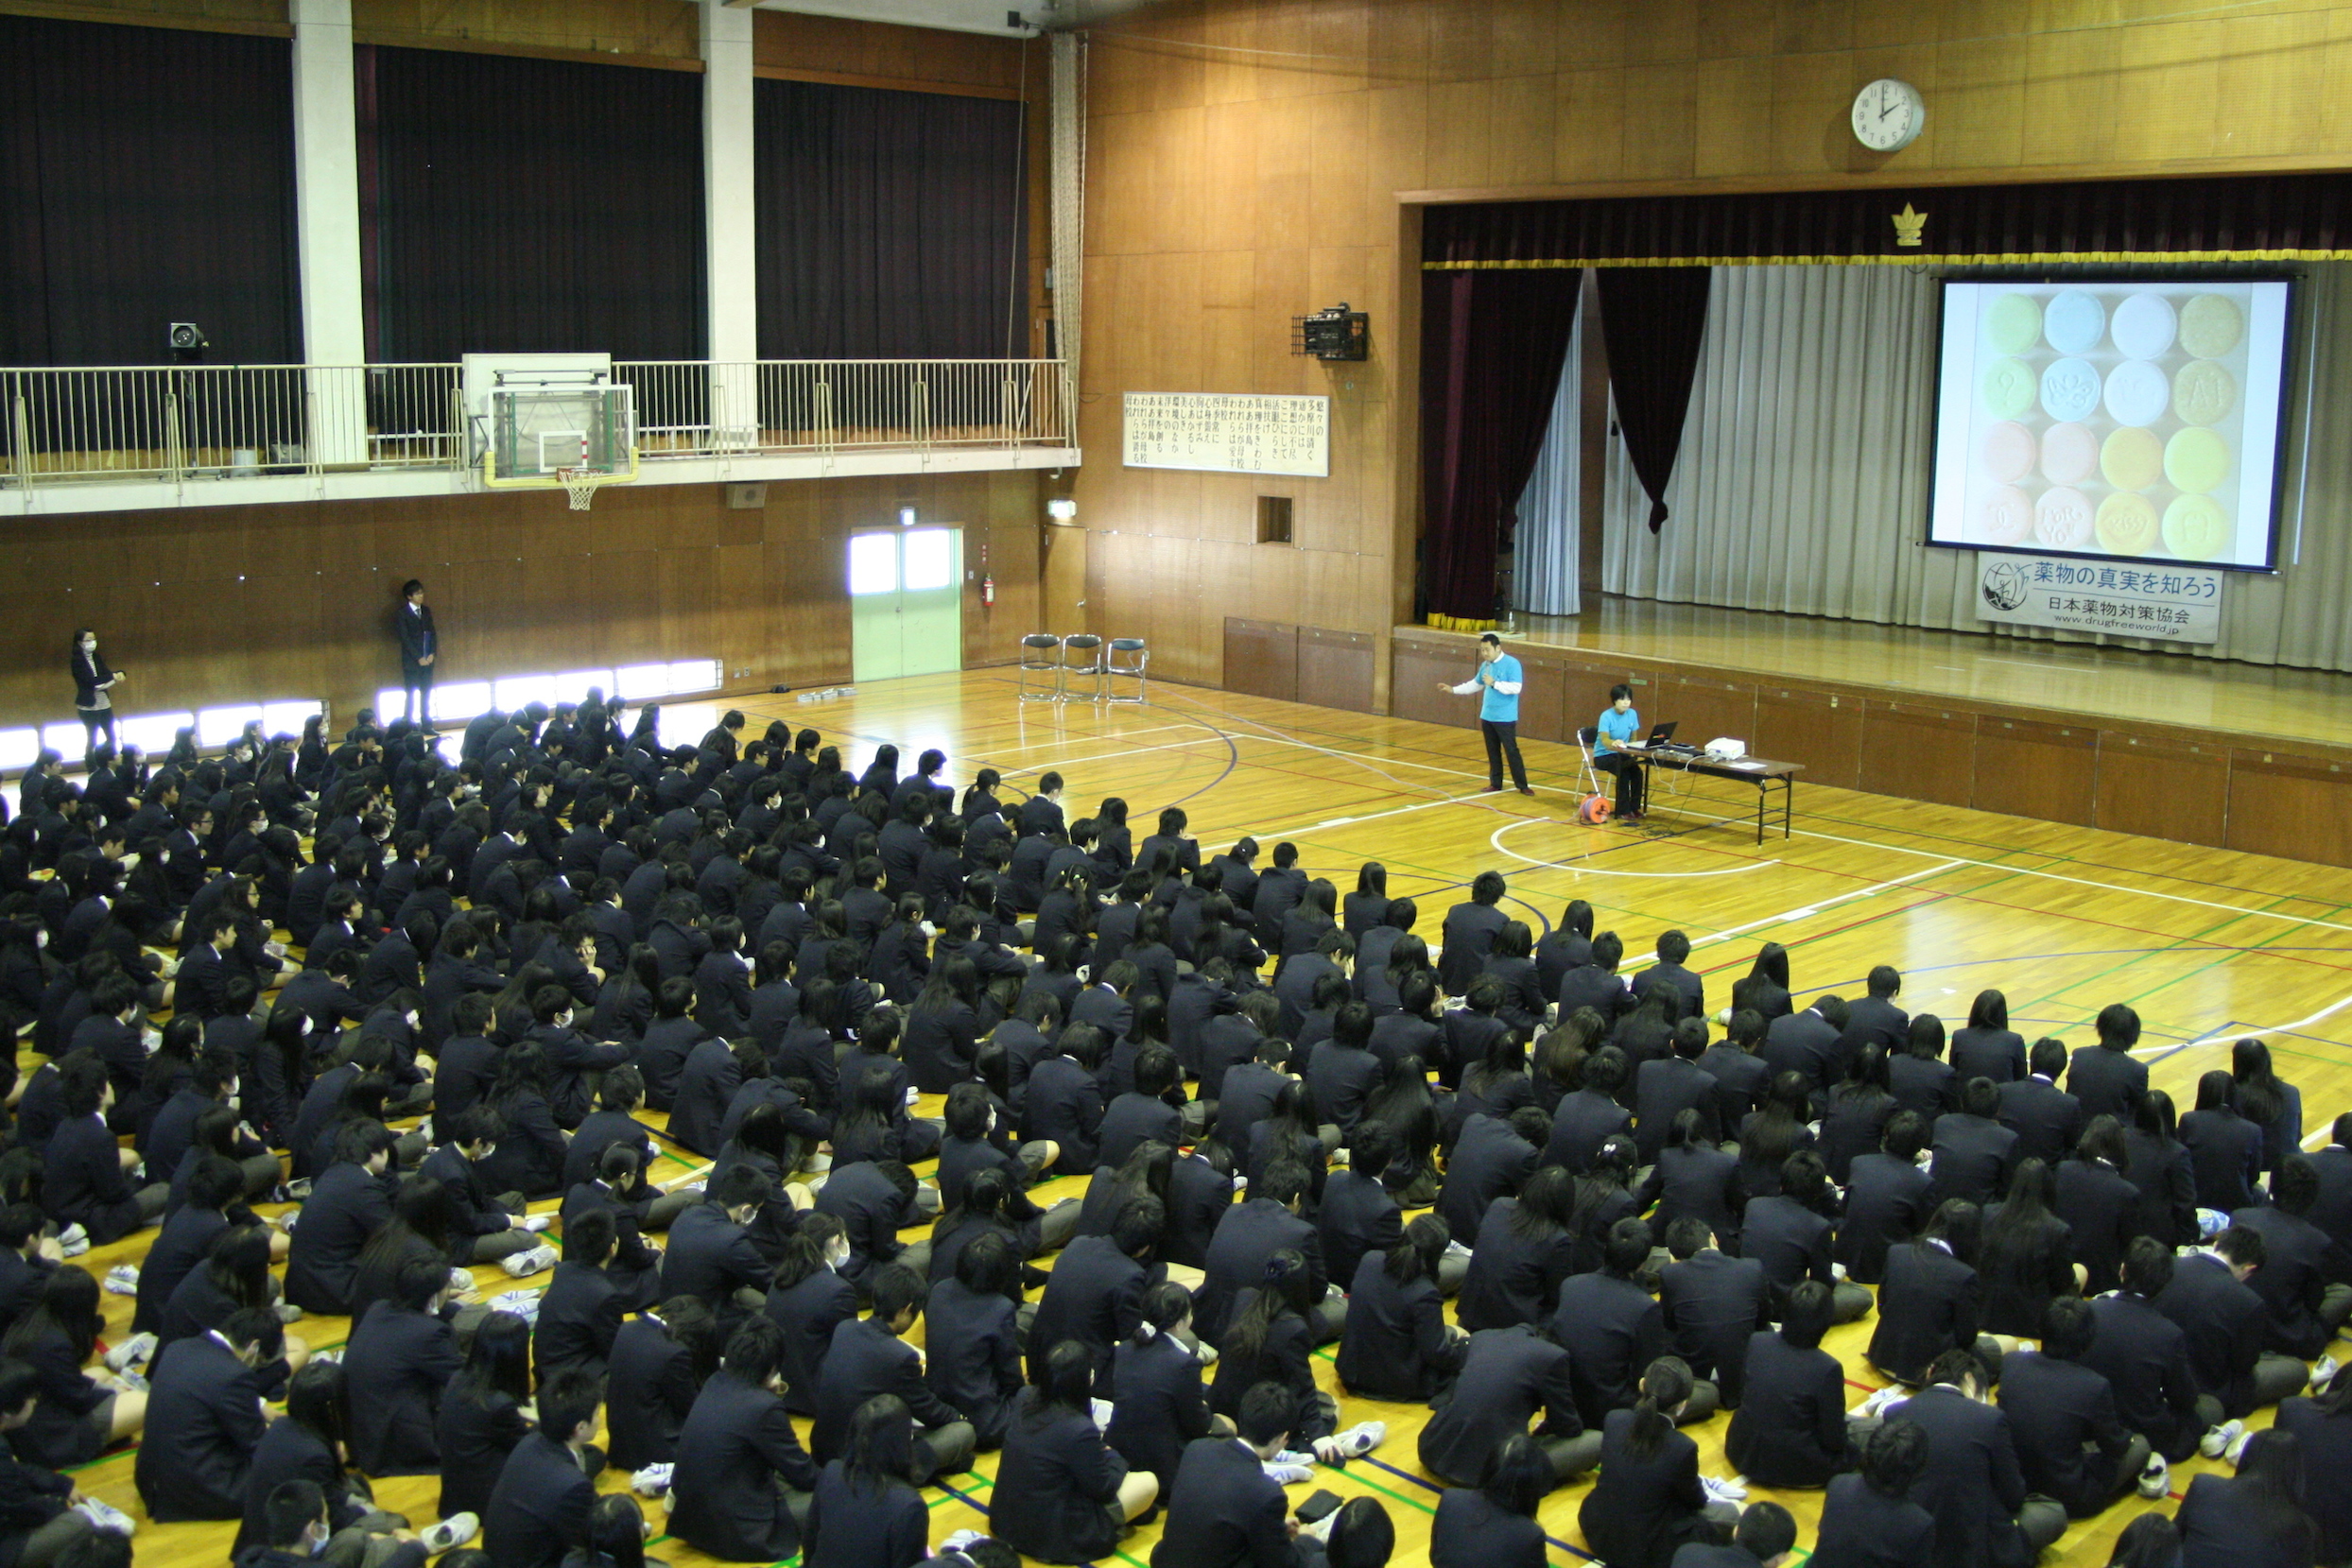 Drug abuse prevention lecture at Haijima High School in Tokyo conducted as part of the drug education and prevention initiative the Church of Scientology supports.